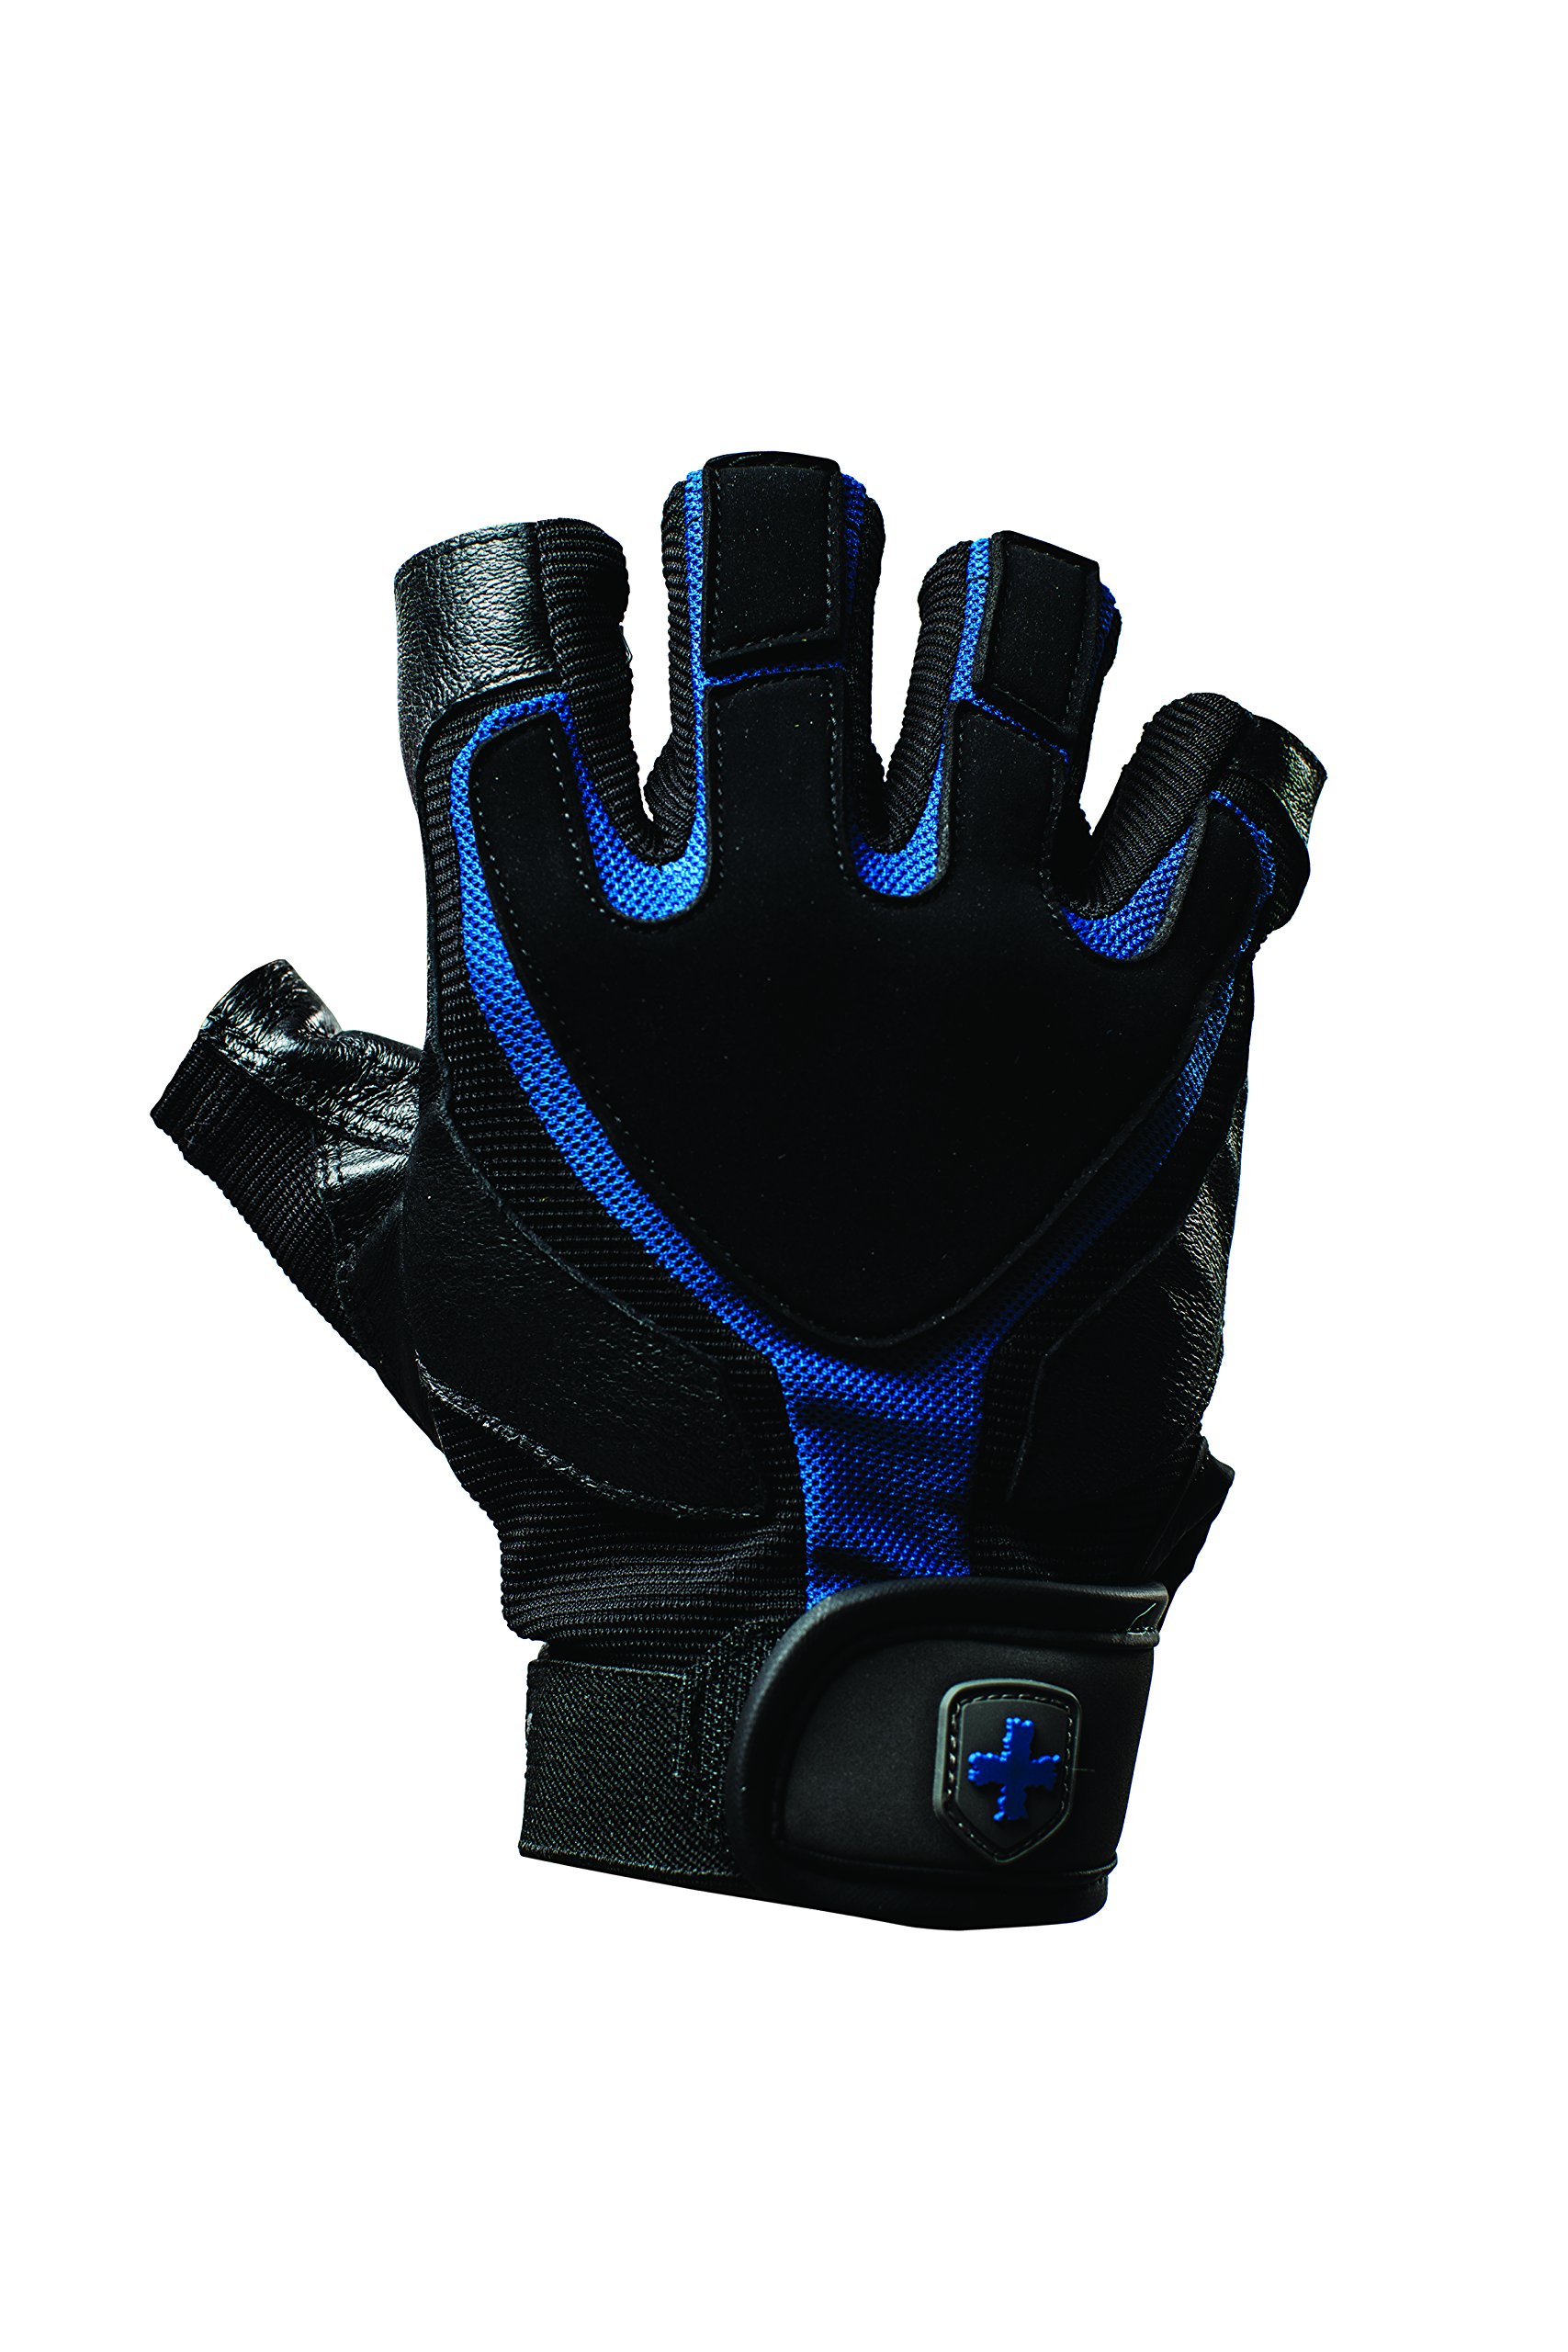 Harbinger Training Grip Weightlifting Workout Gloves 2.0, Small